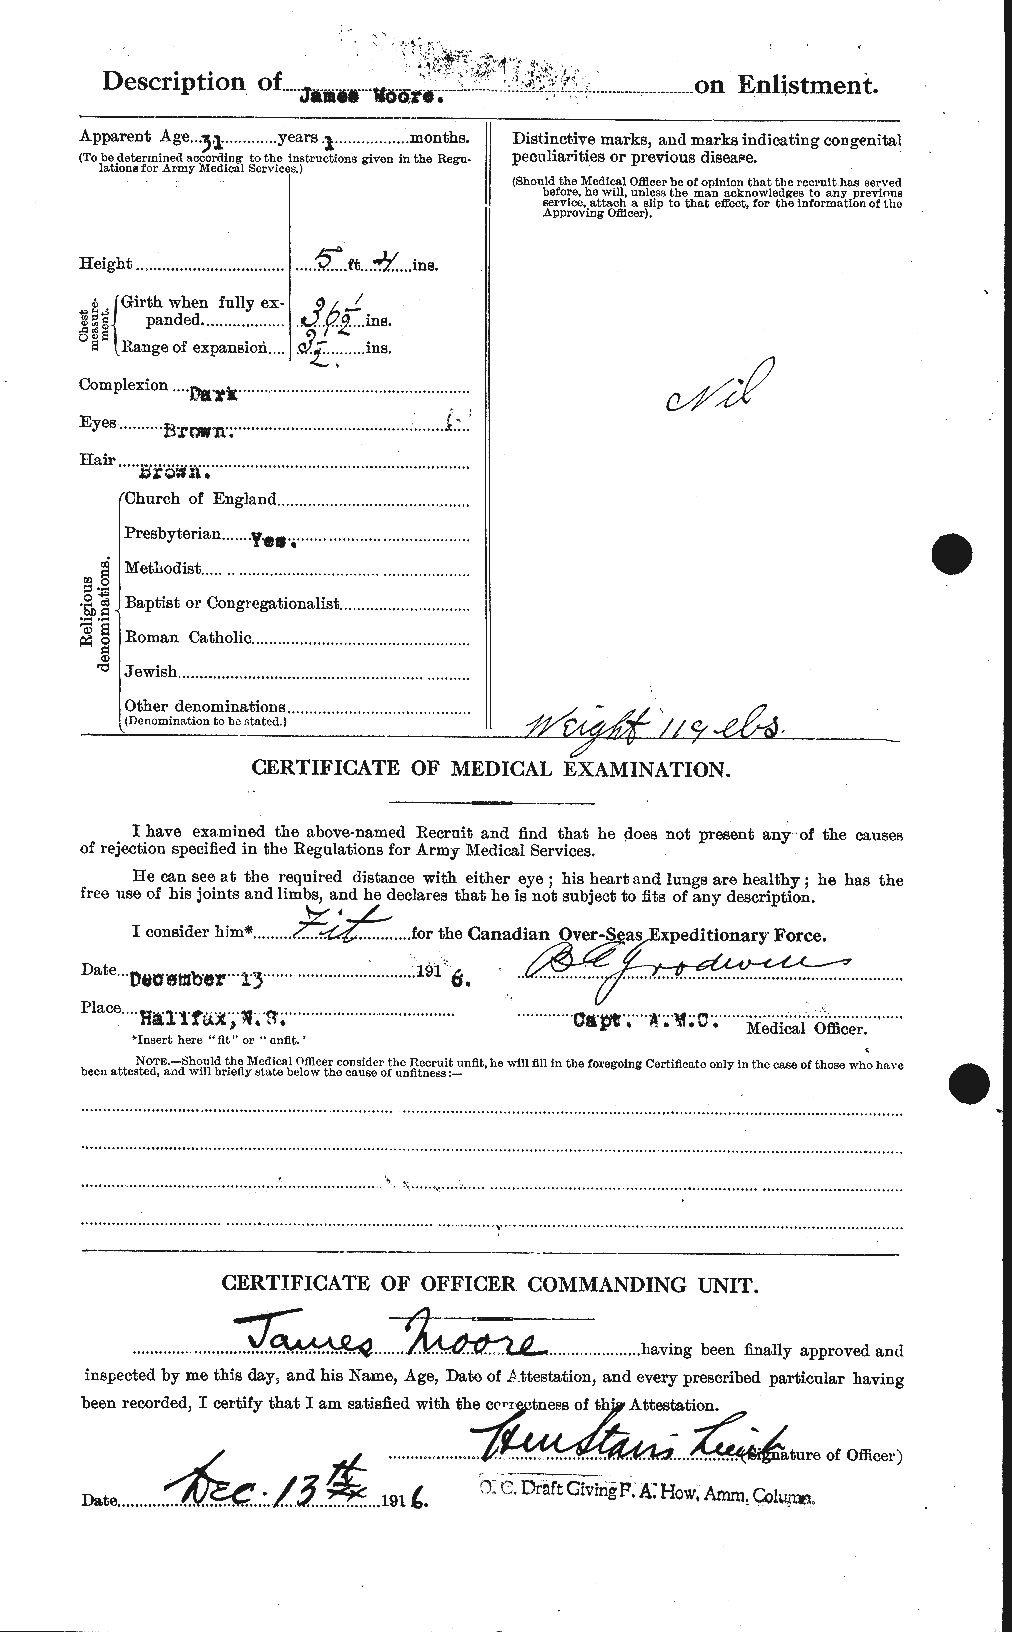 Personnel Records of the First World War - CEF 502174b